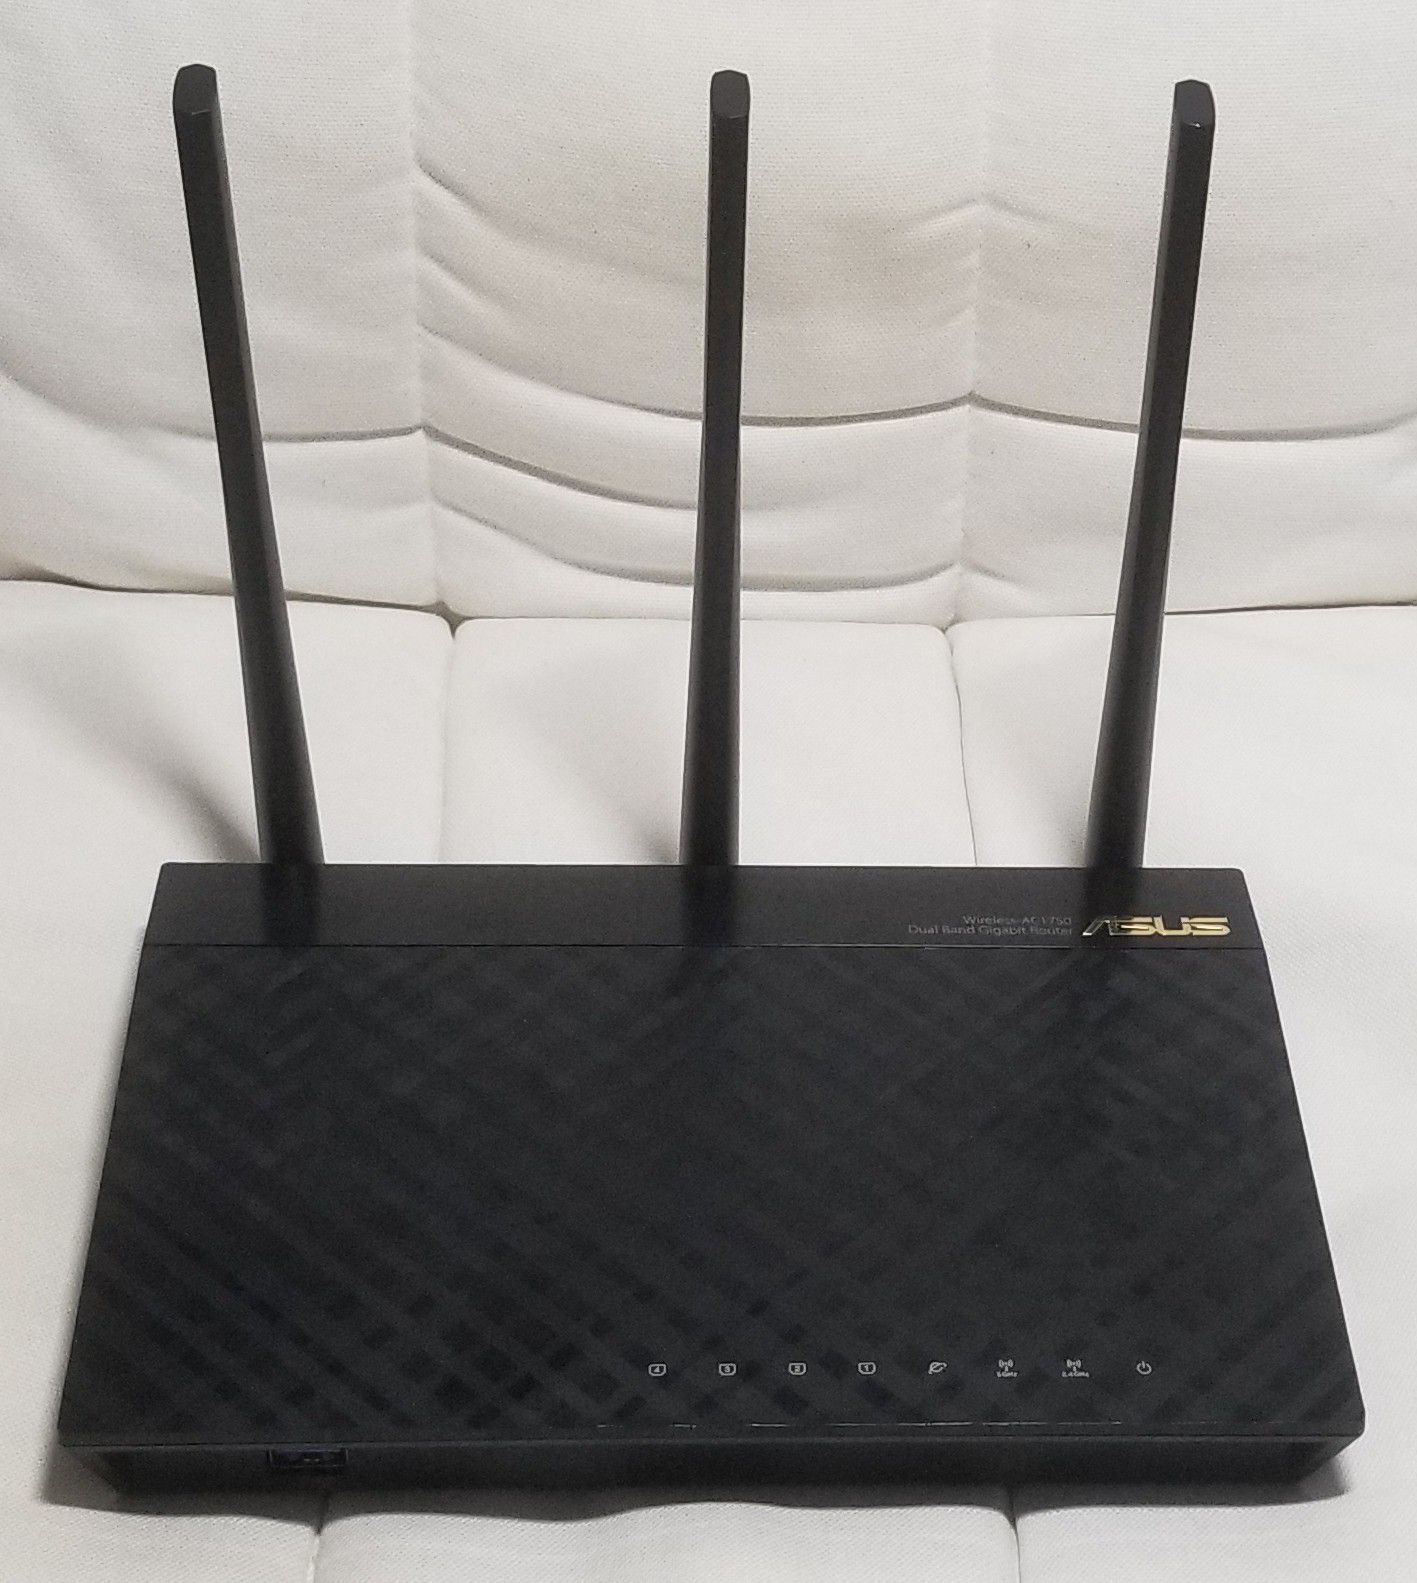 Wireless Router, Asus AC-1750